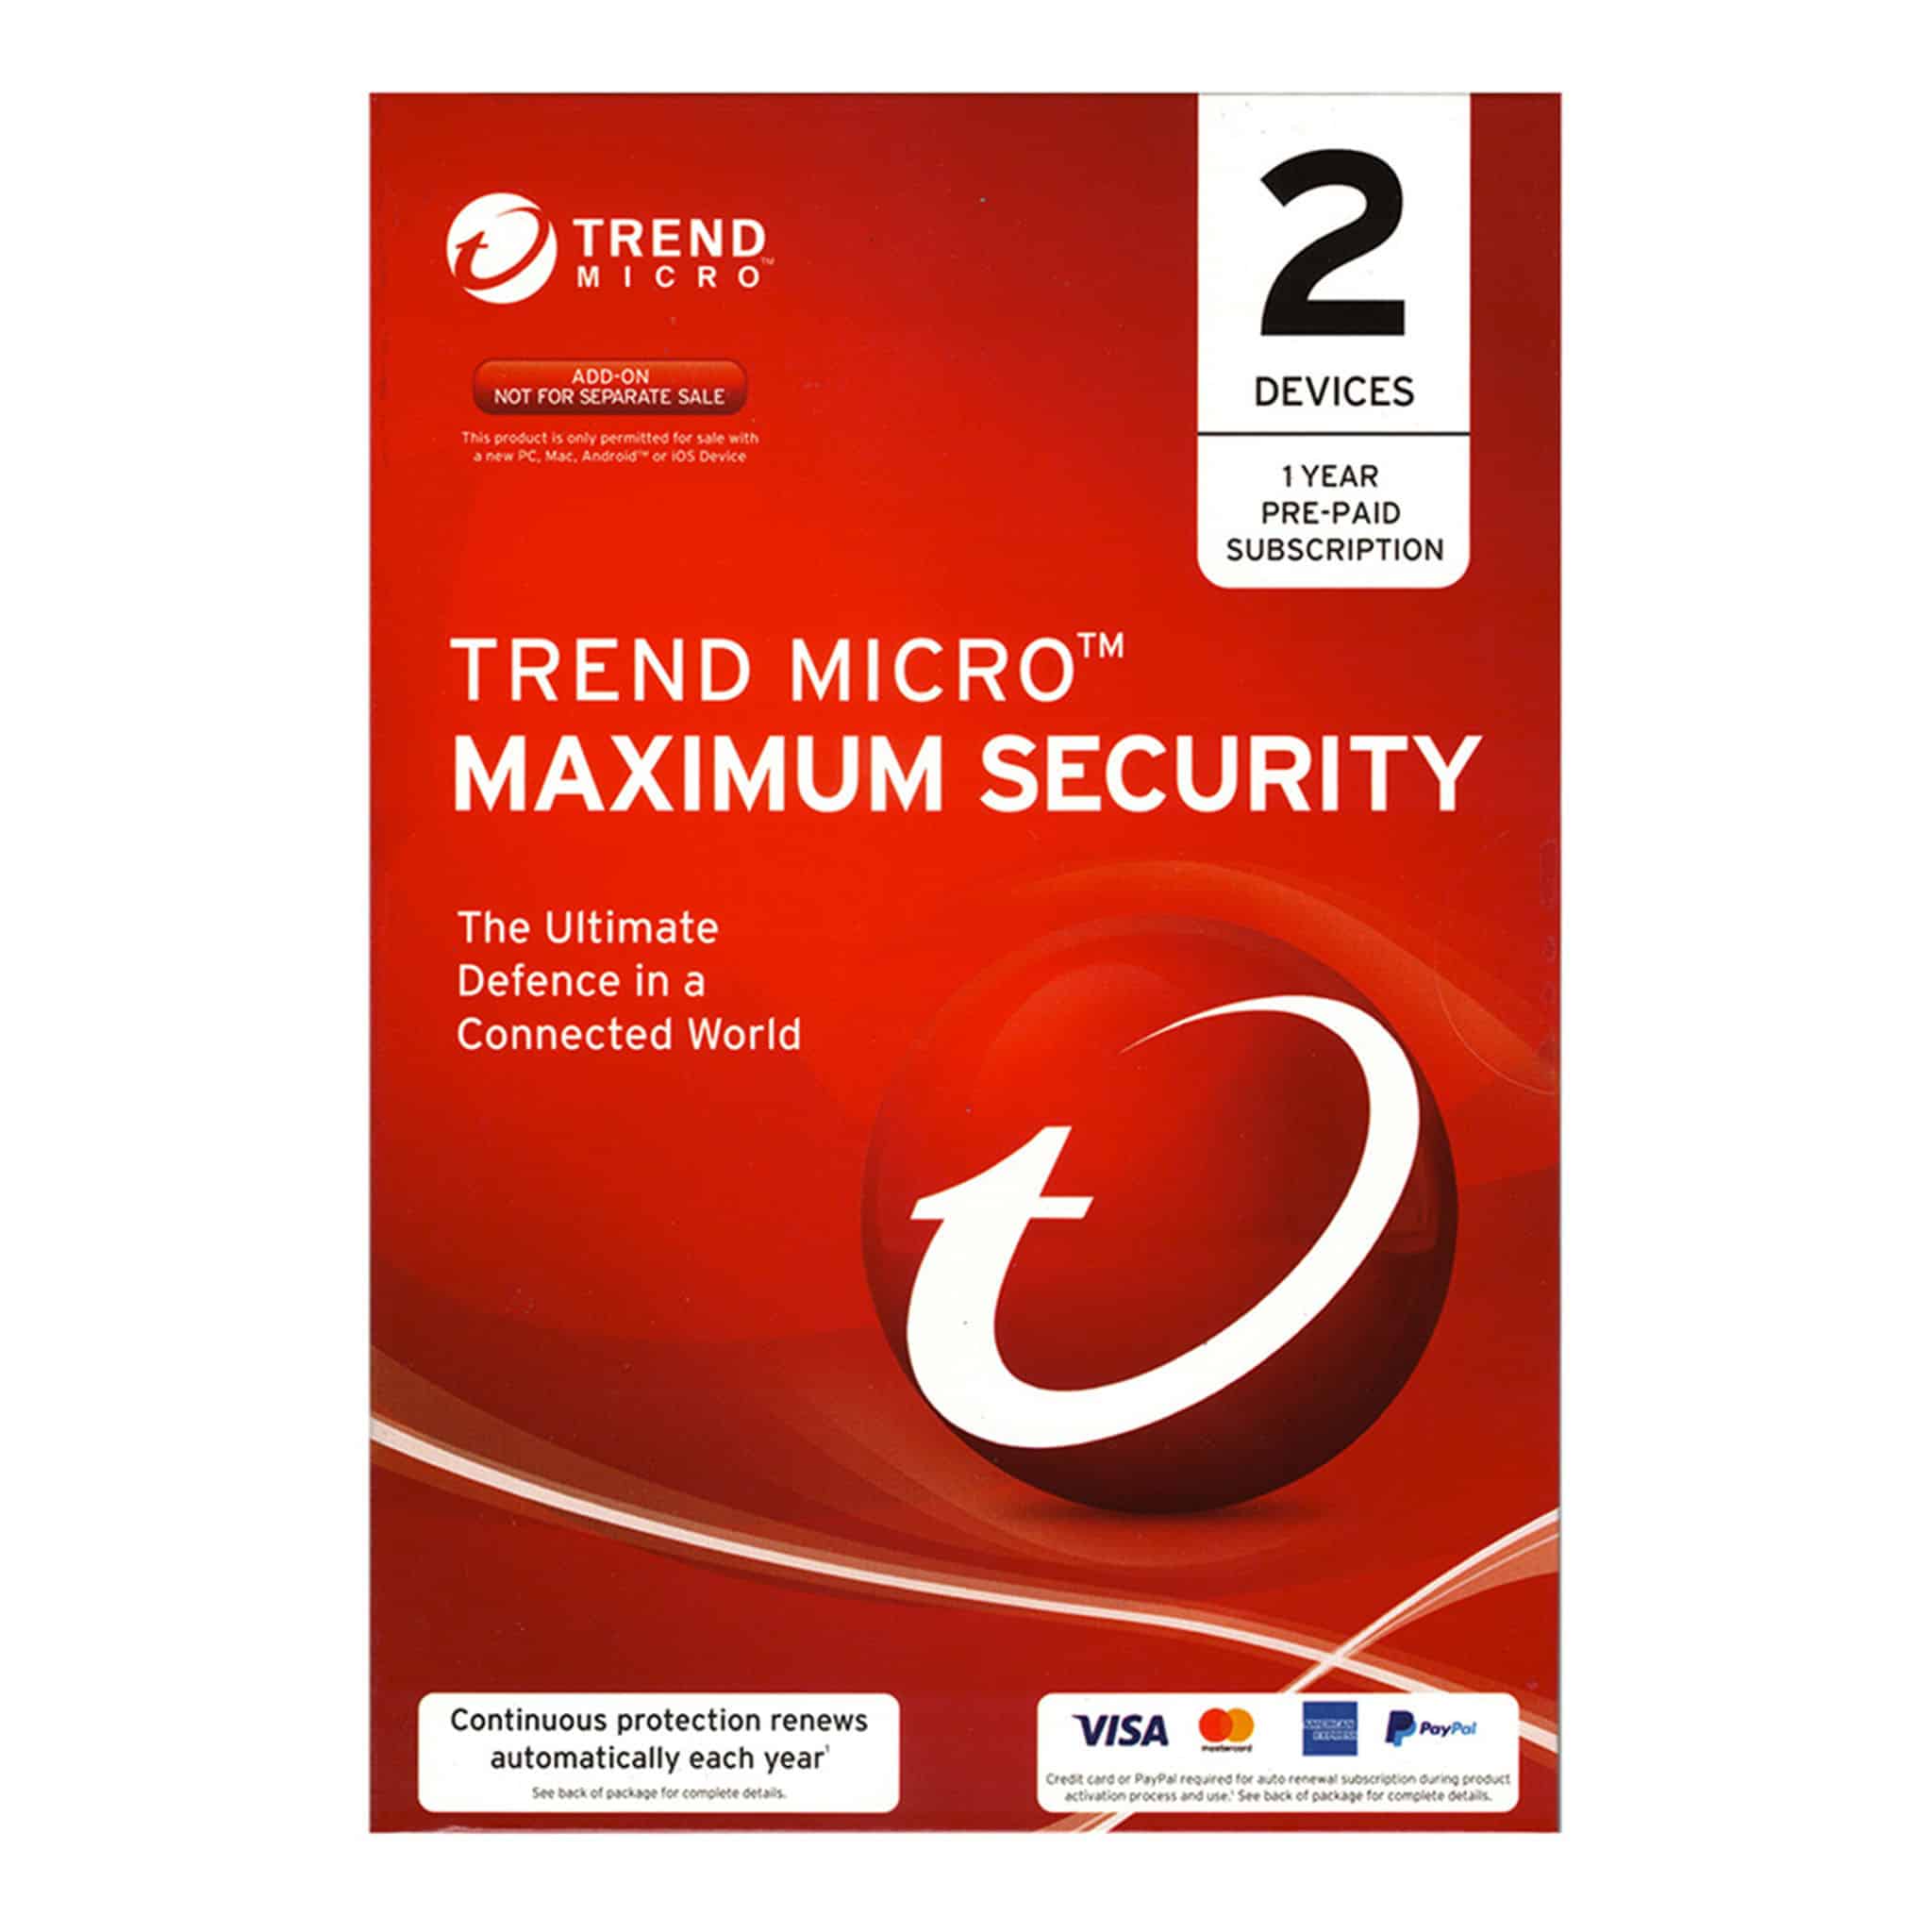 Trend Micro Maximum Security 2 Devices 1 Year